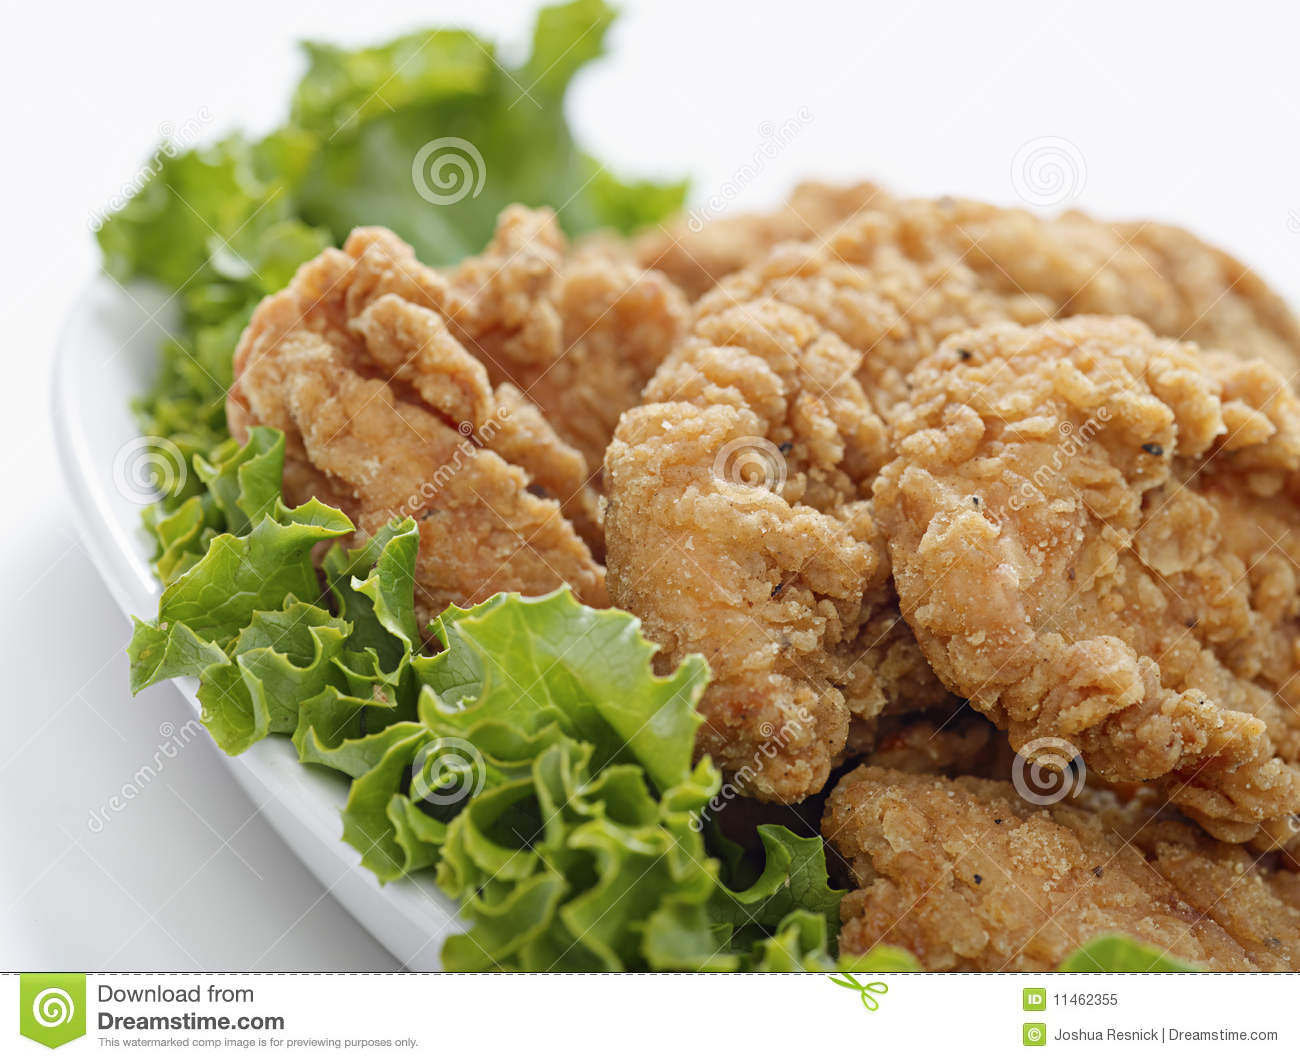 Chicken Tenders Royalty Free Stock Photo   Image  11462355